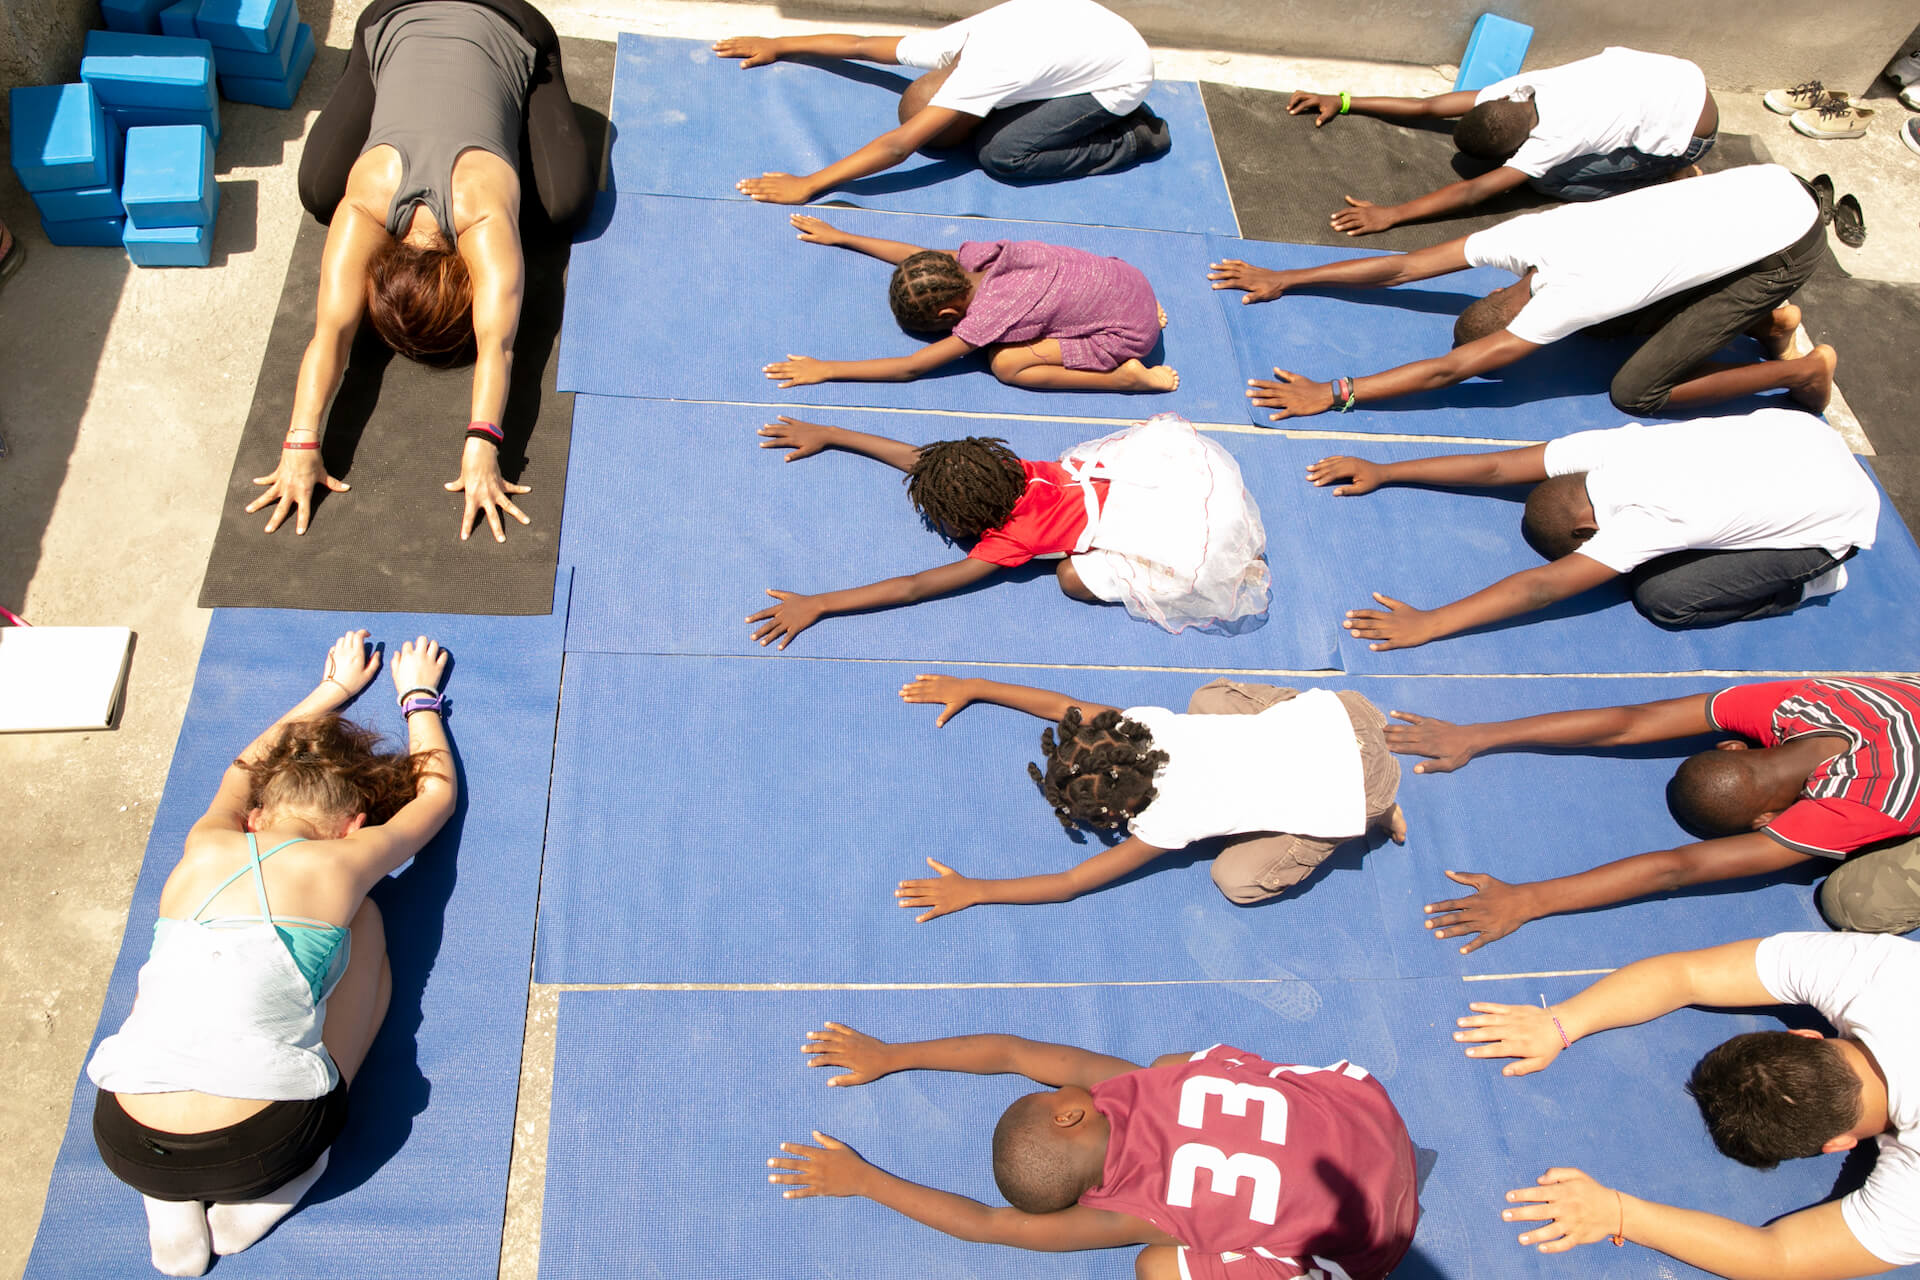 Jen Goodman, a licensed yoga instructor, taught yoga and stretching classes for the children to help them understand the importance of self care.